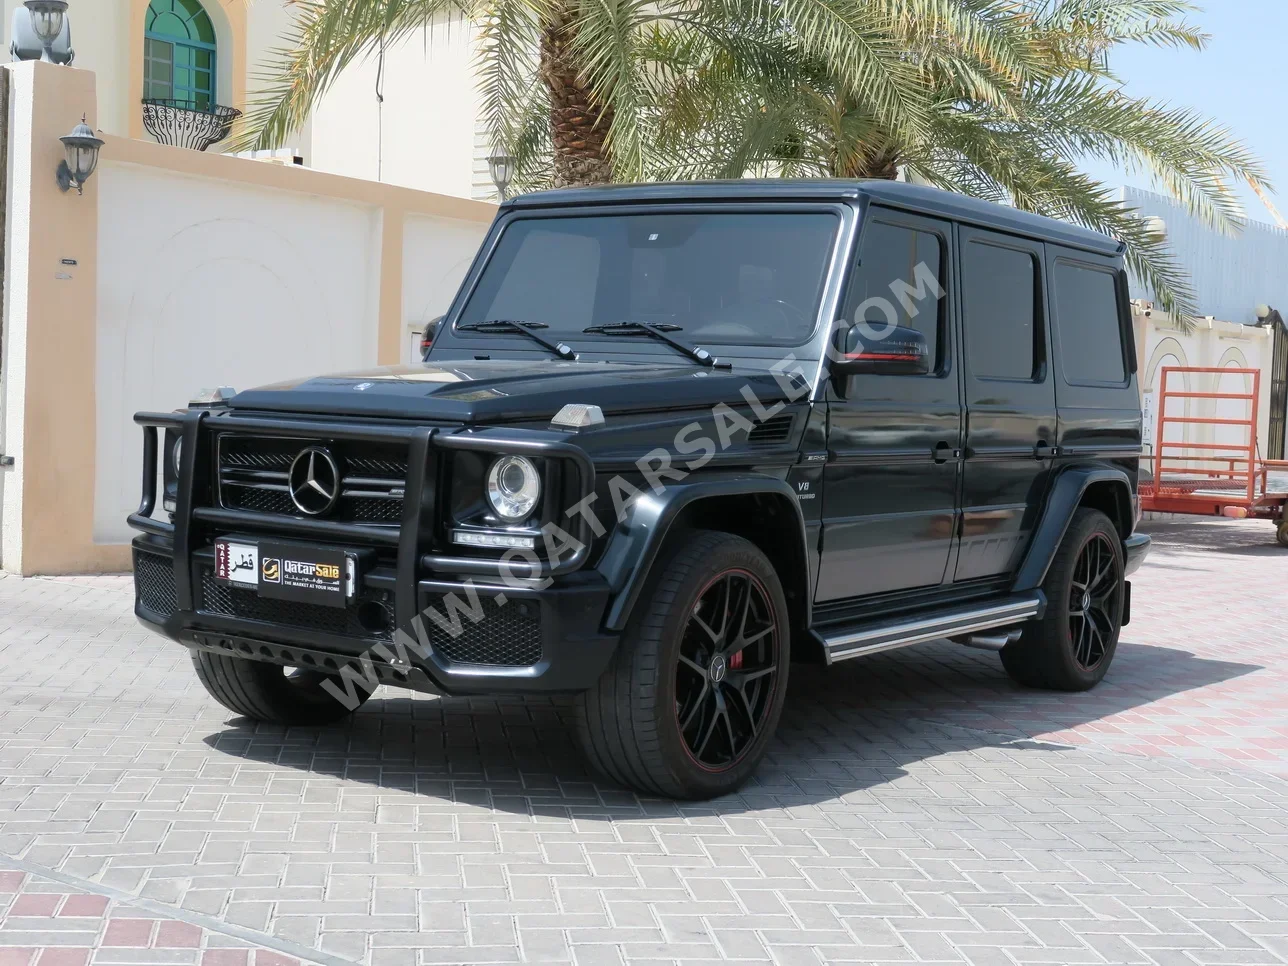 Mercedes-Benz  G-Class  63 AMG  2017  Automatic  73,000 Km  8 Cylinder  Four Wheel Drive (4WD)  SUV  Black